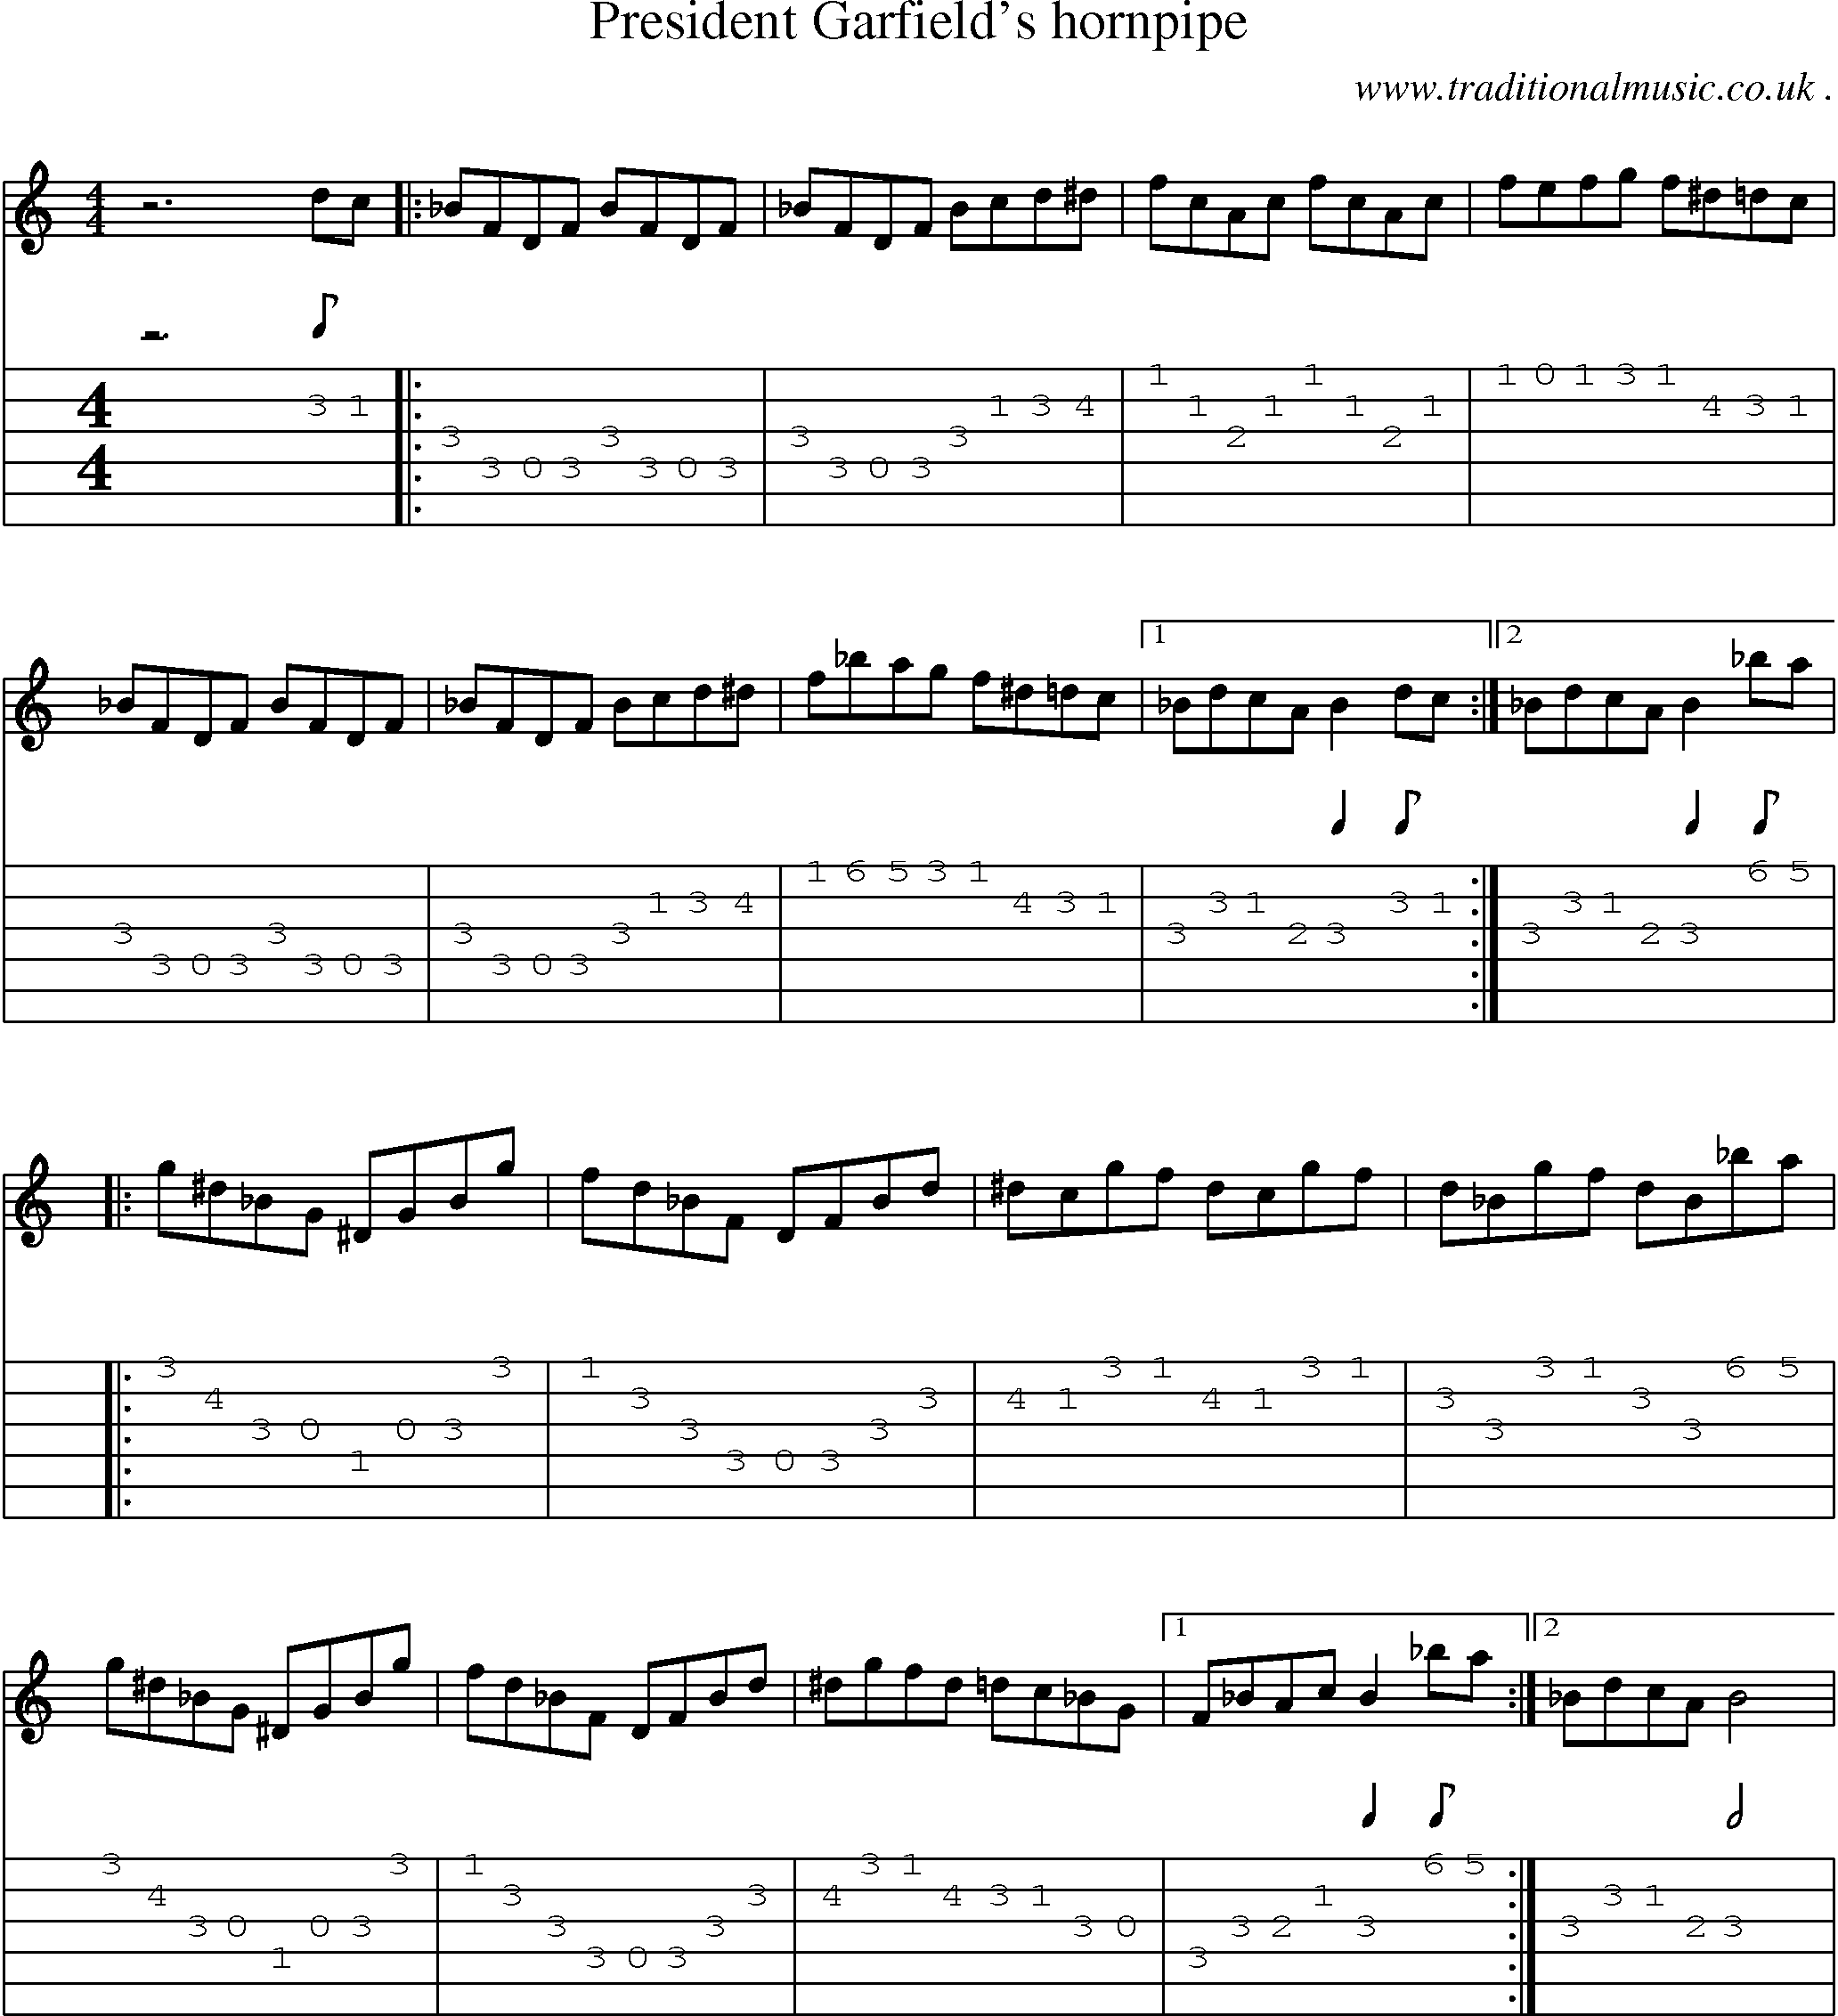 Music Score and Guitar Tabs for President Garfields Hornpipe